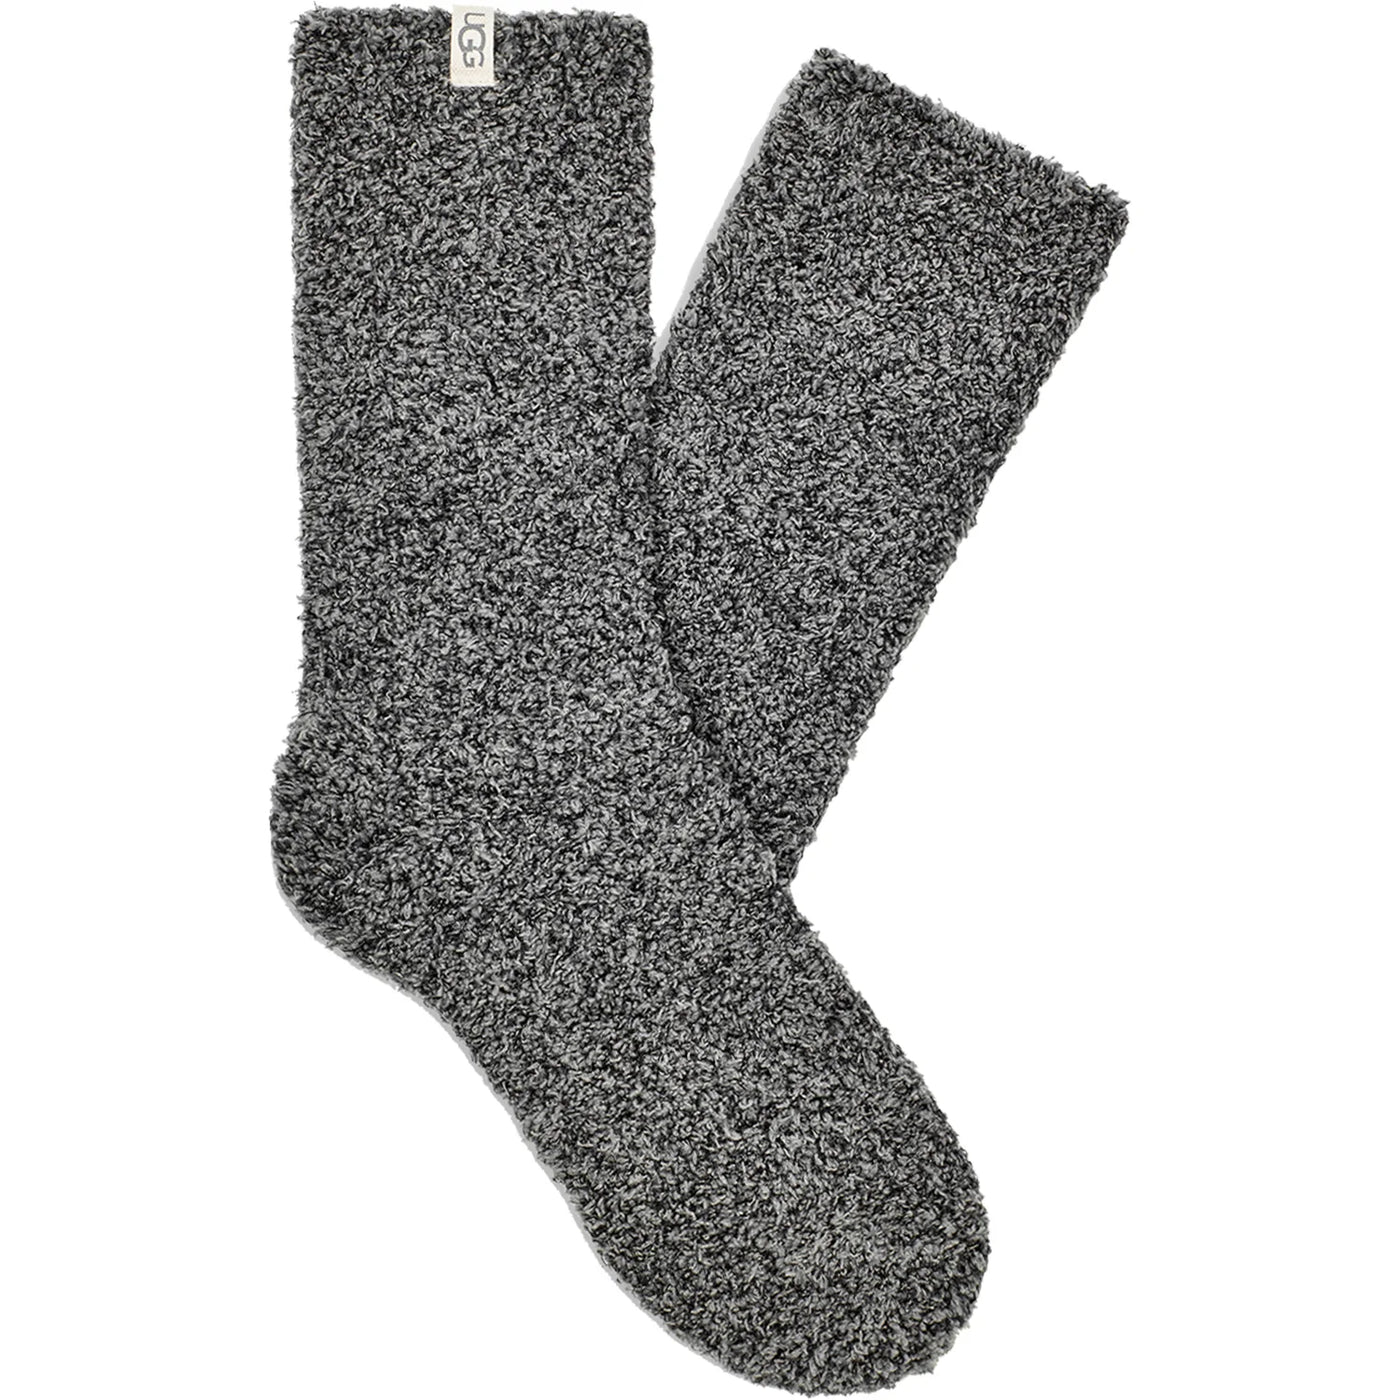 Darcy Cozy Sock in Charcoal - Madison's Niche 